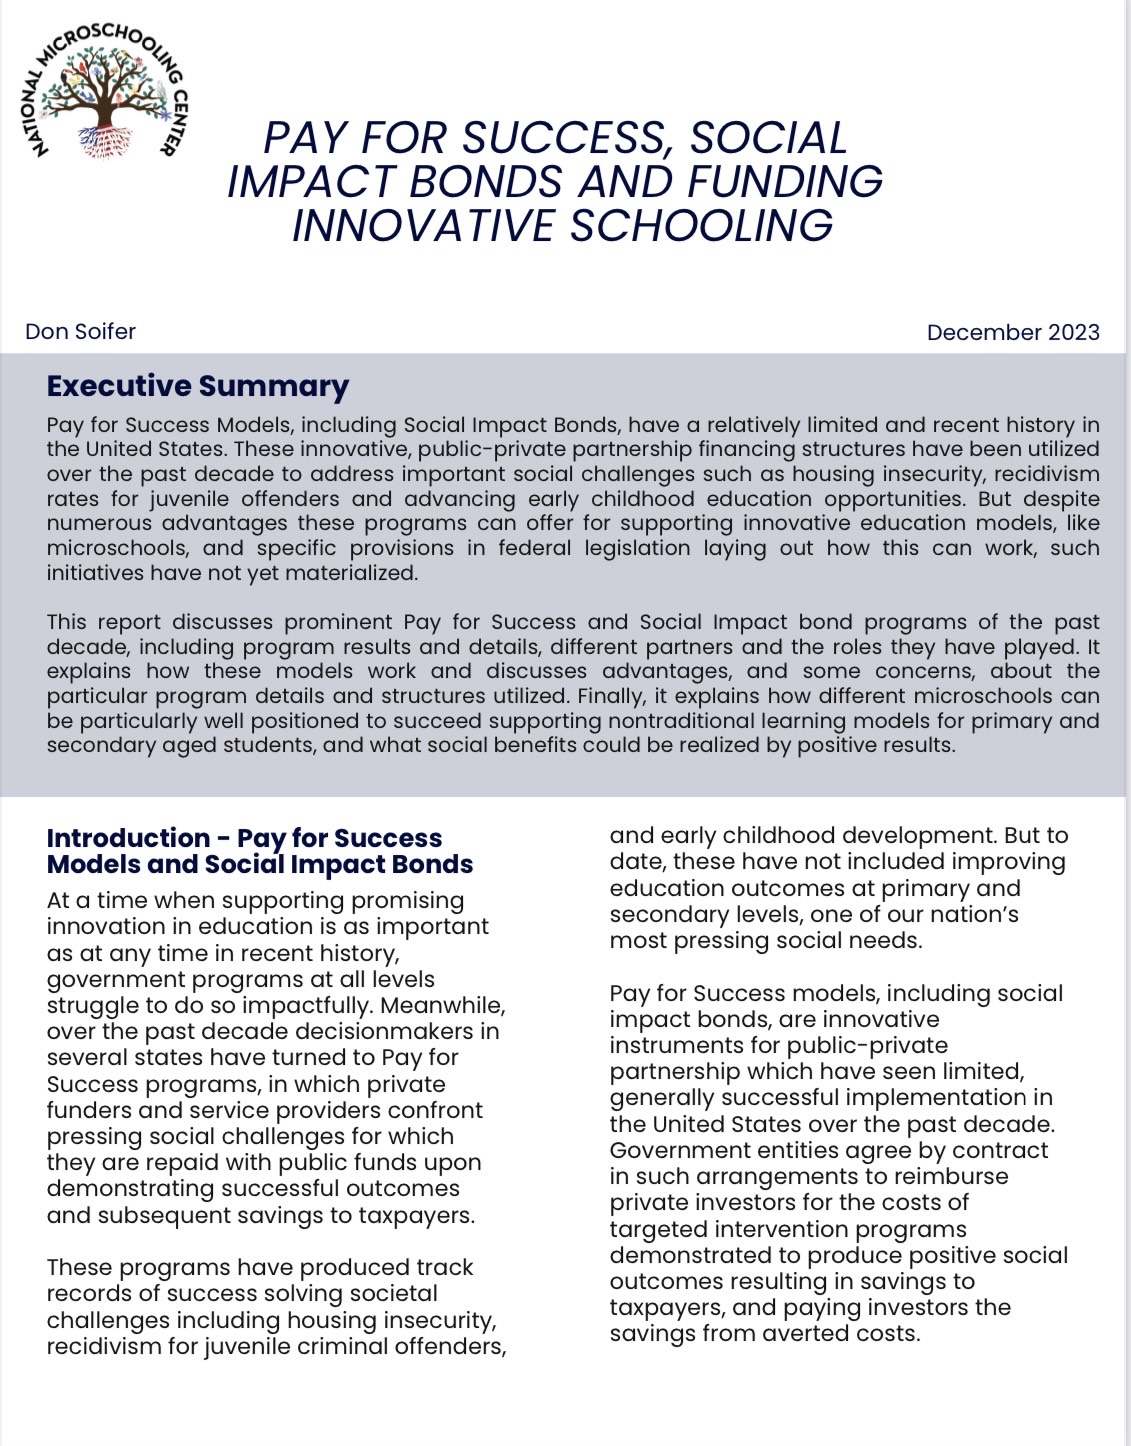 Pay for Success, Social Impact Bonds and Funding Innovative Schooling